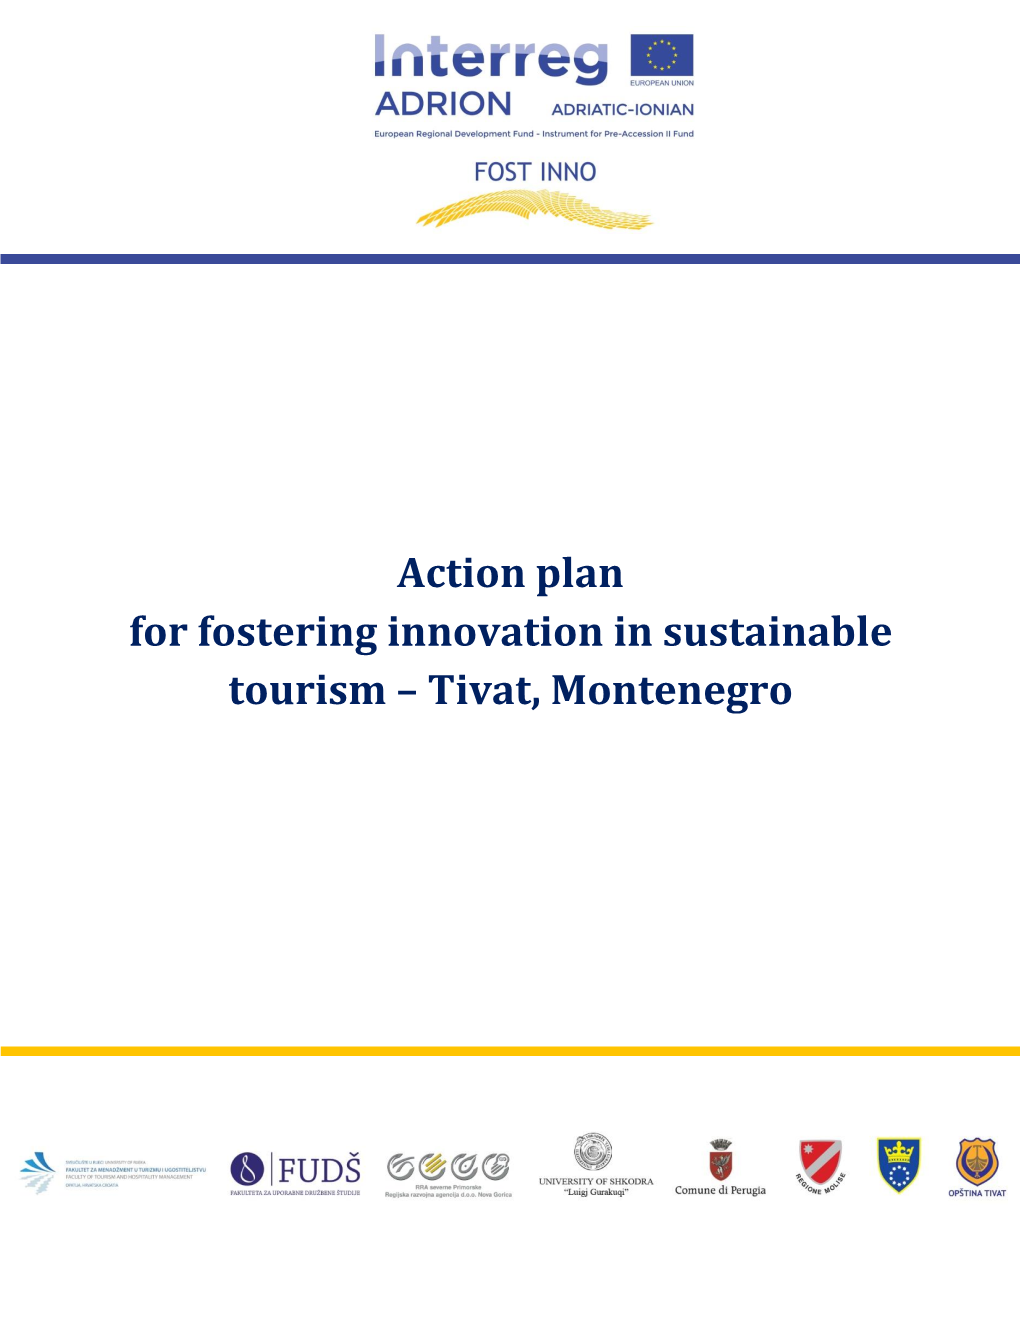 Action Plan for Fostering Innovation in Sustainable Tourism – Tivat, Montenegro